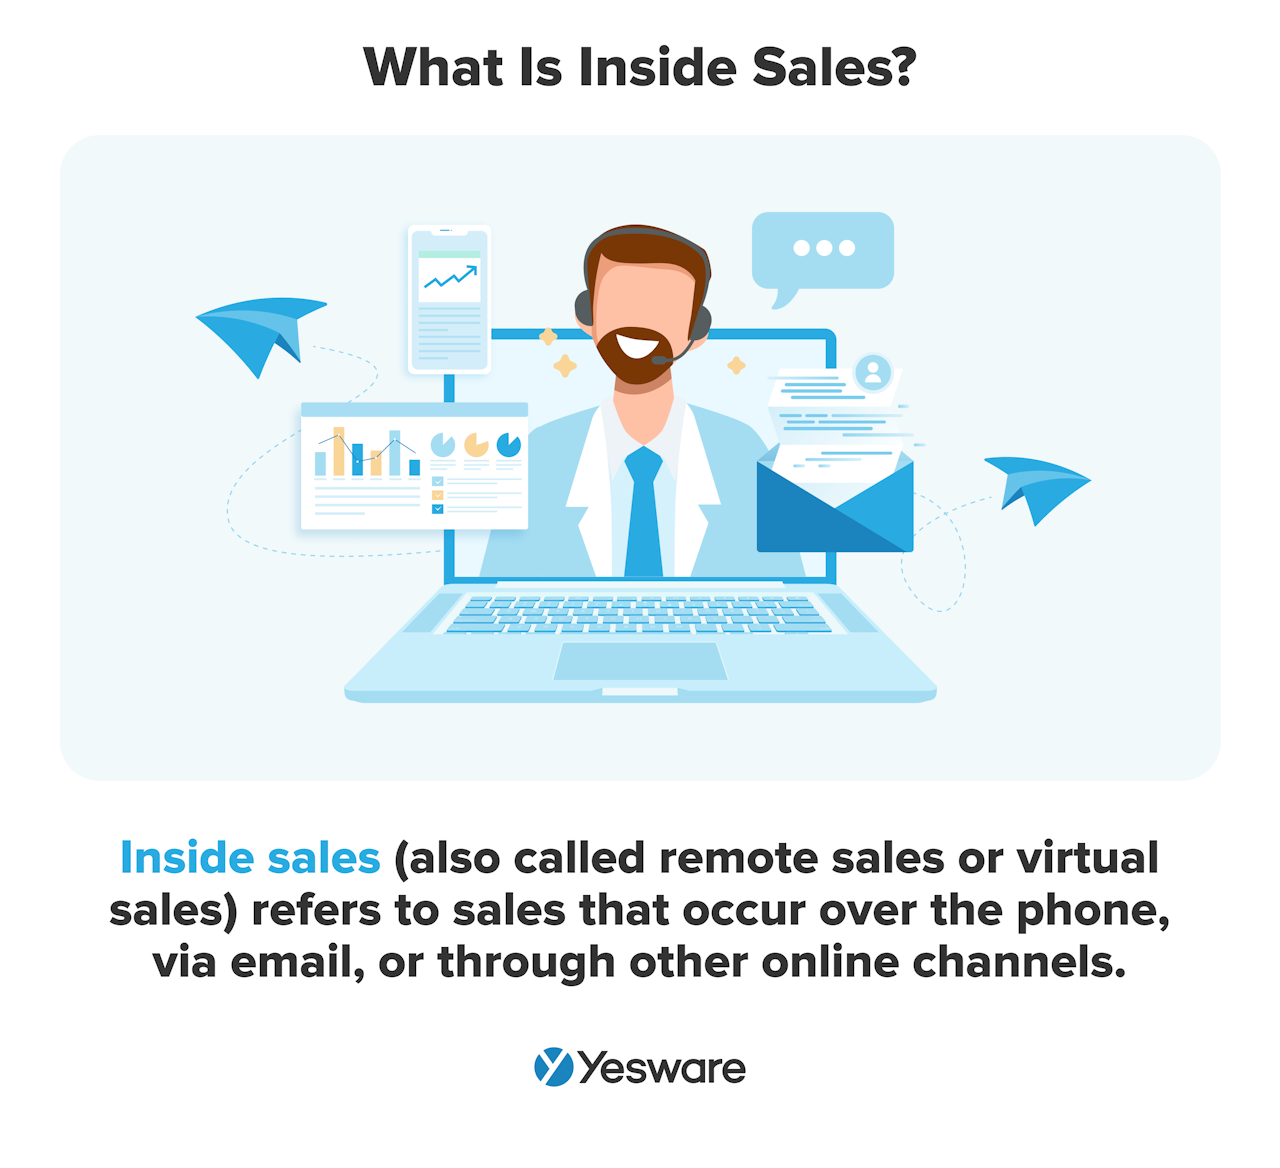 What is inside sales?